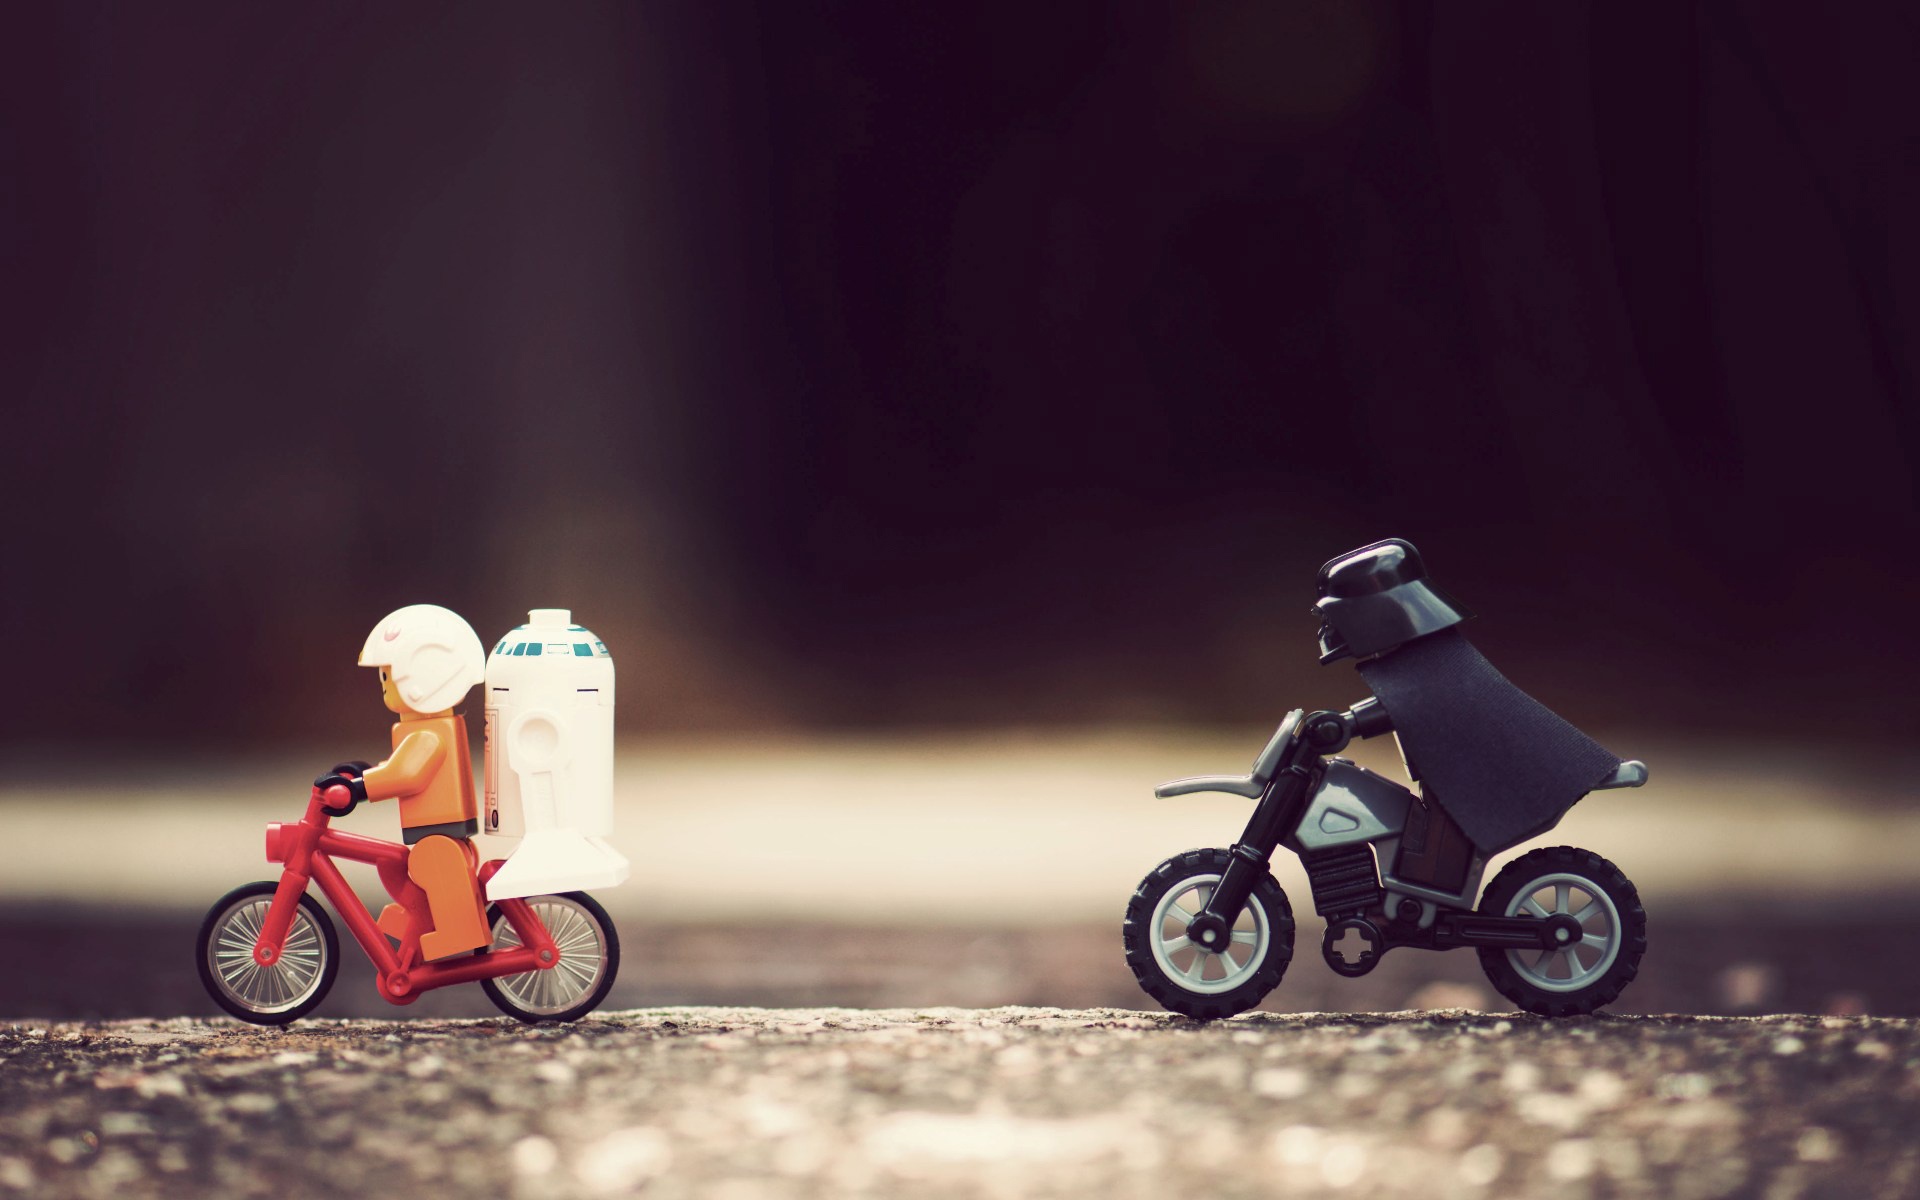 lego star wars wallpaper,vehicle,mode of transport,motorcycle,sky,moped